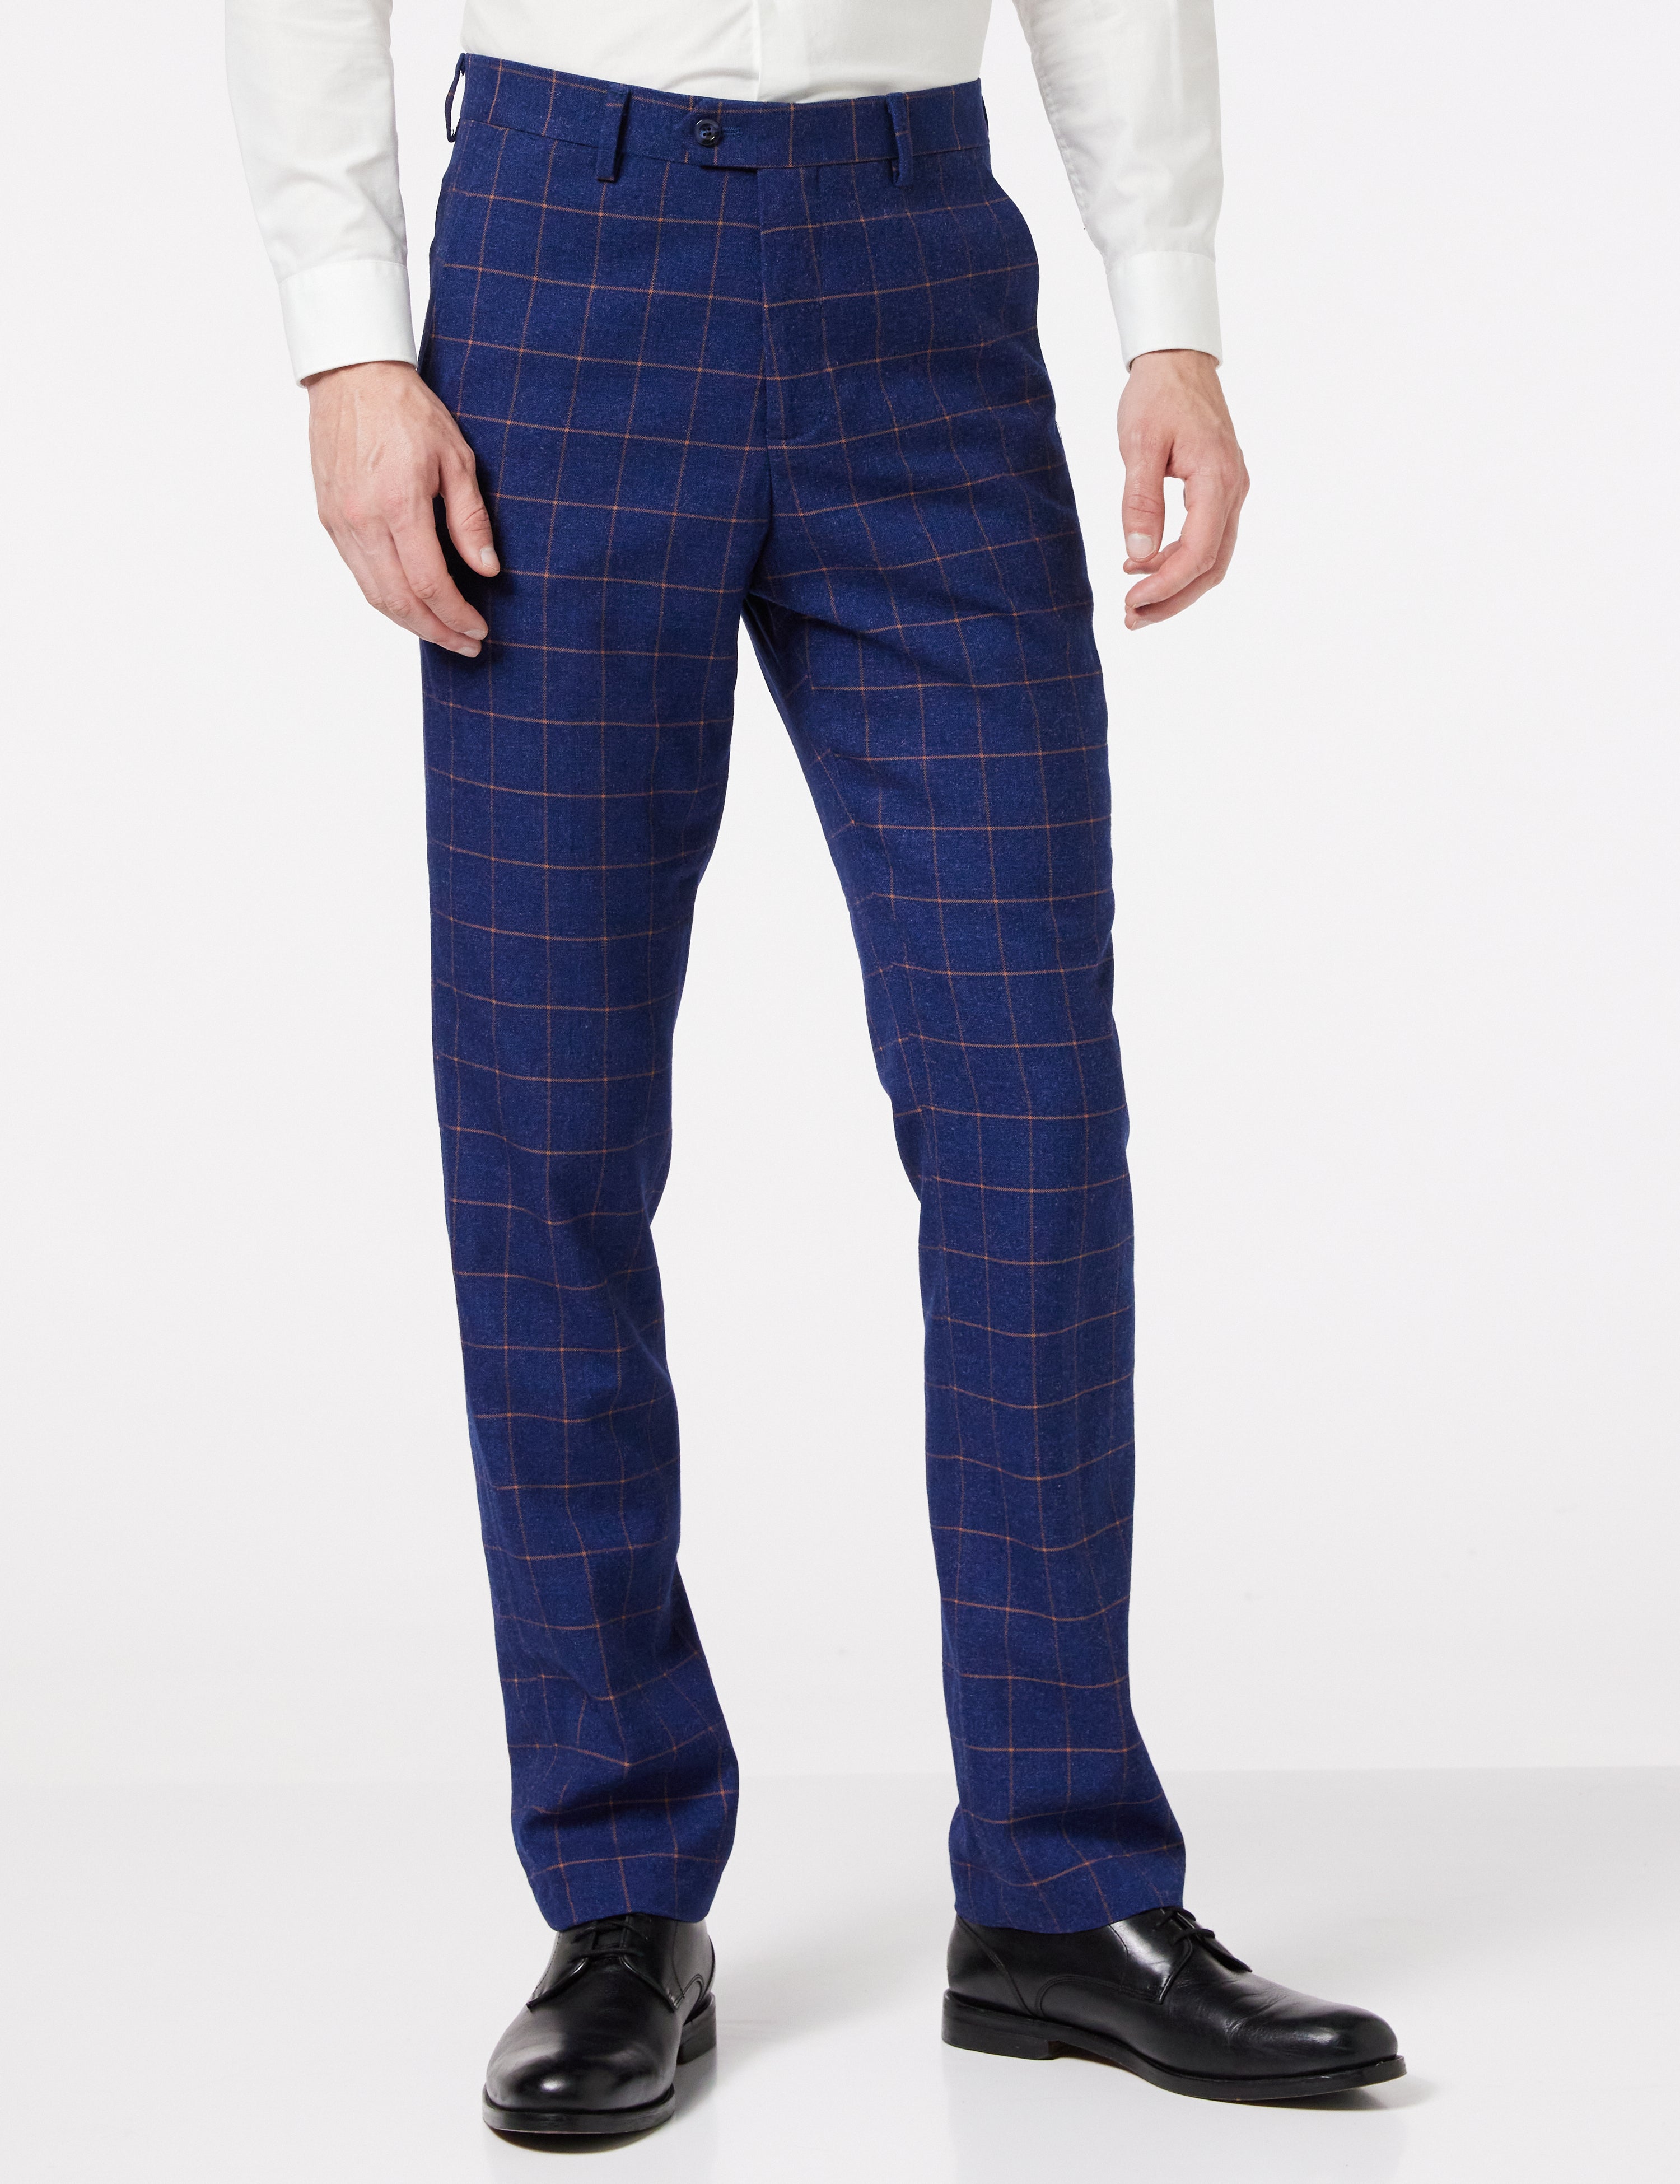 Latest Ralph Lauren Printed Trousers arrivals - Men - 2 products | FASHIOLA  INDIA